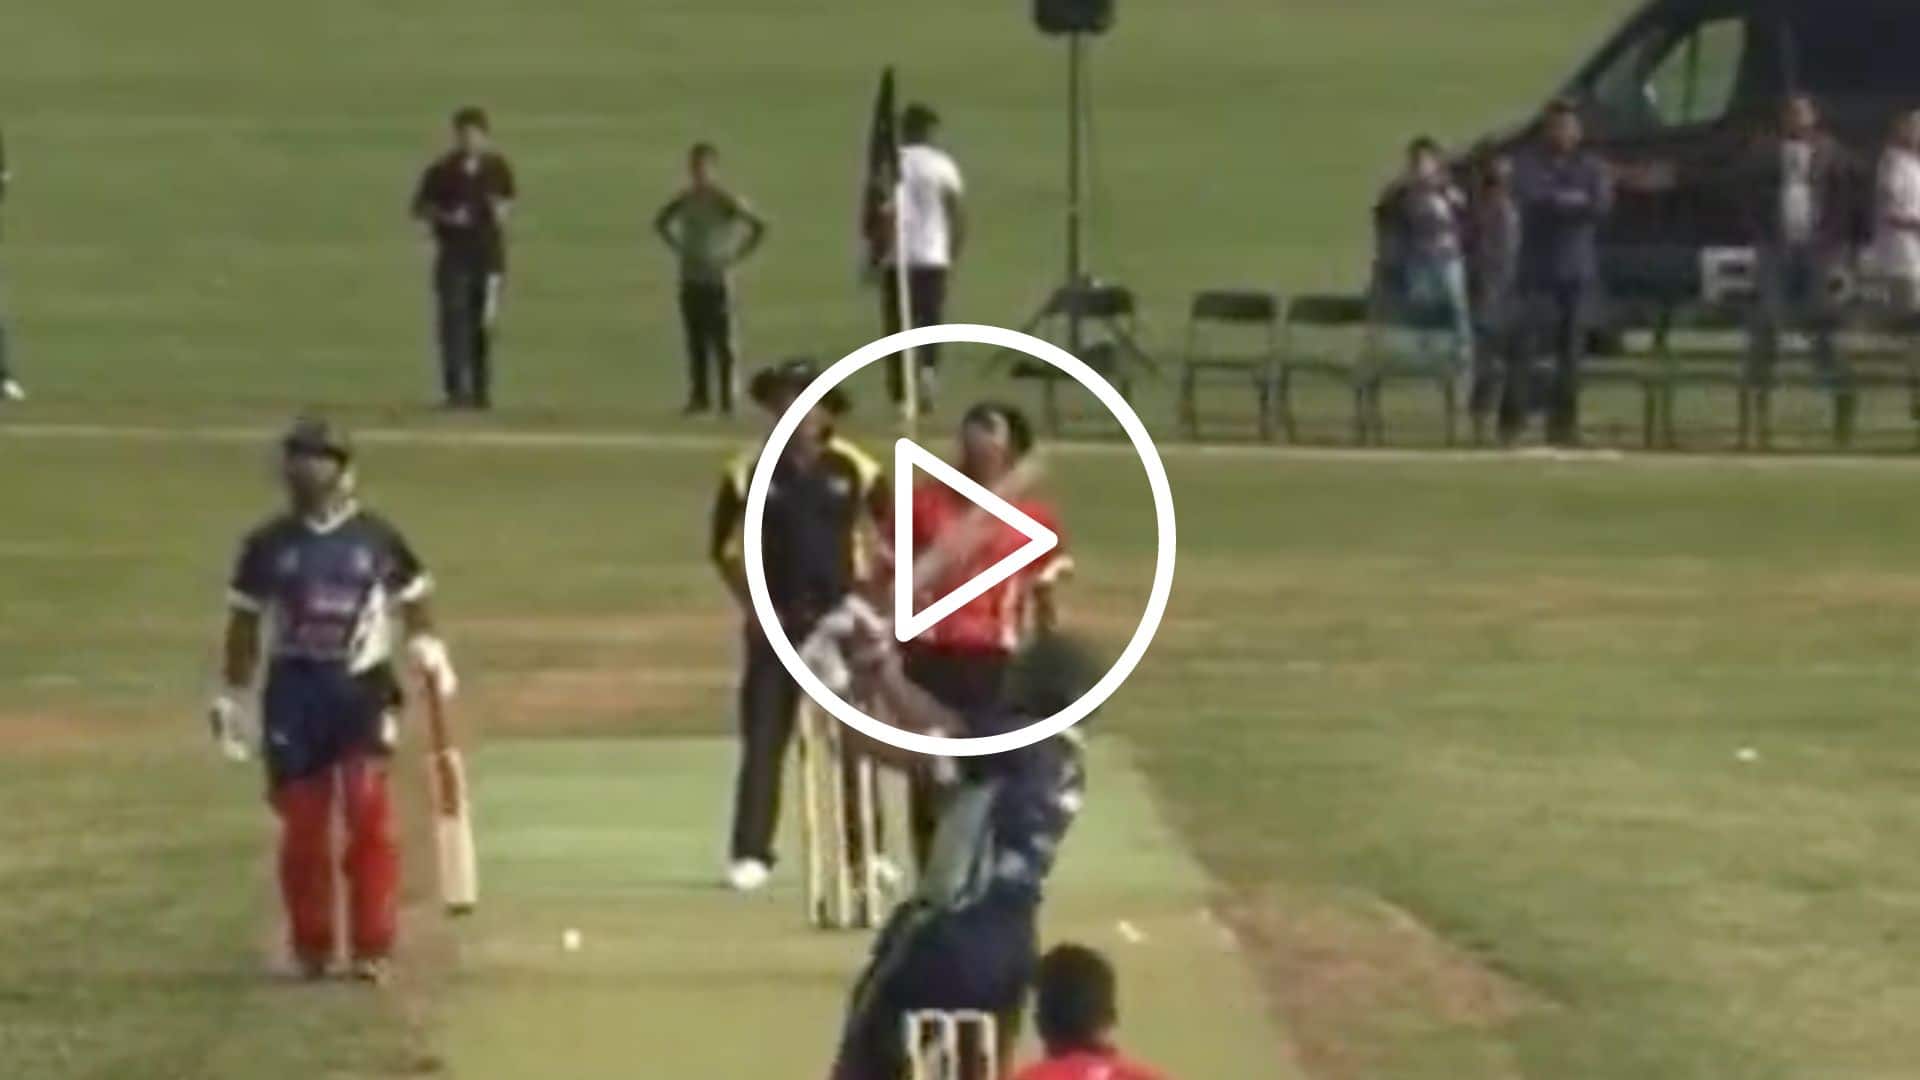 [Watch] Mohammad Asif Belted By Local Player; Fans Mock Him For Babar Azam Warning